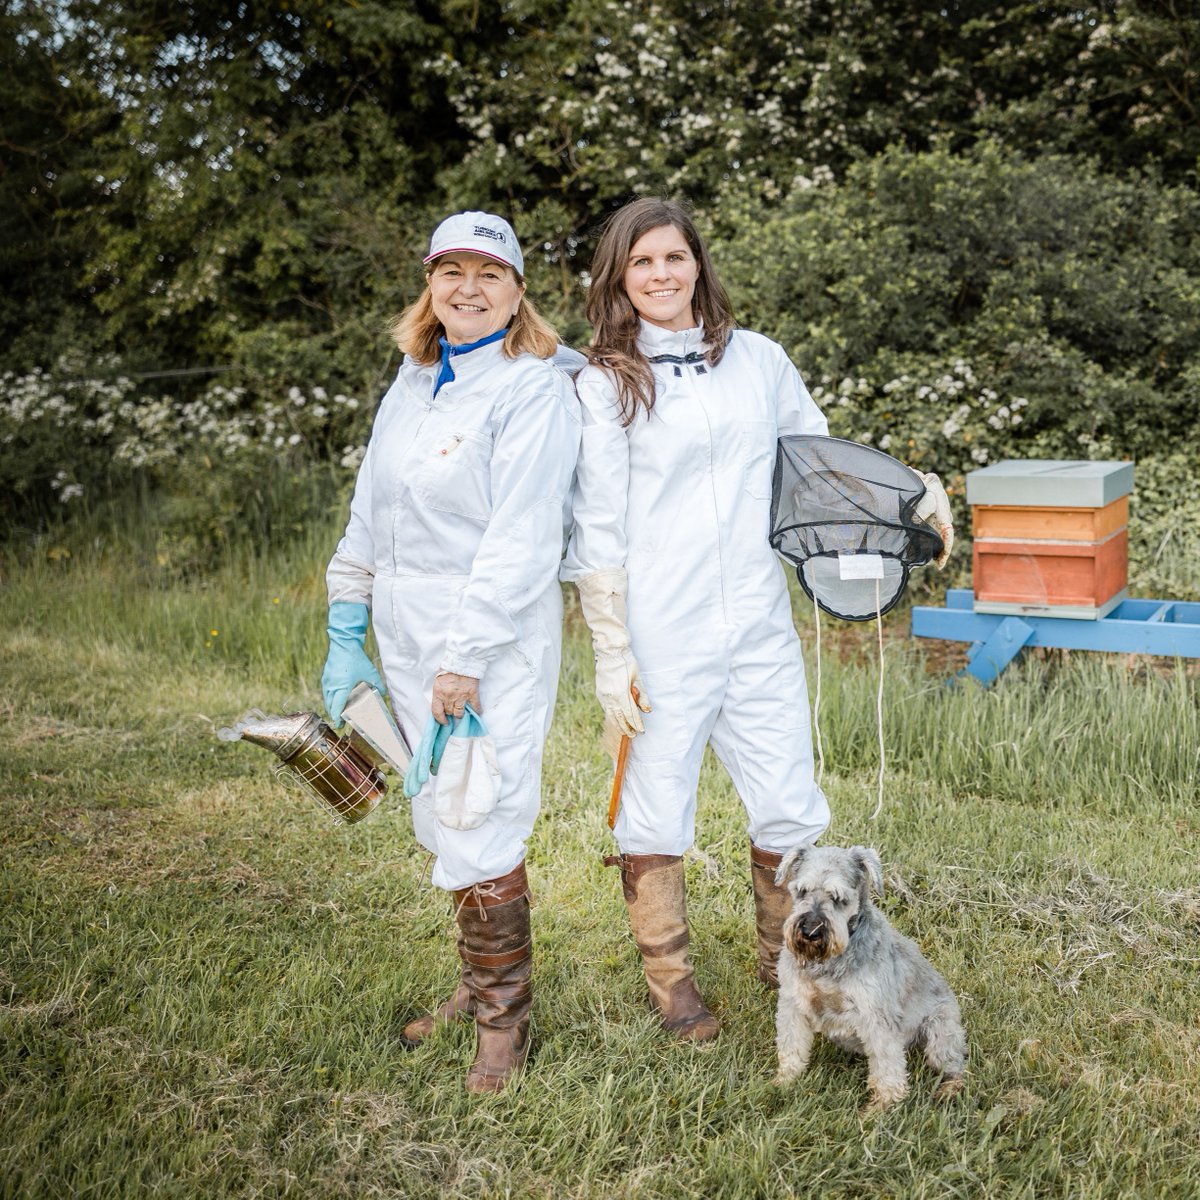 It was International Dog Day over the weekend so we wanted to dedicate a post to Miniature Schnauzer Max, the best four legged orchard and bee-keeping assistant in all the land 🐾

#internationaldogday #dogsofinstagram #miniatureschnauzer #orchard #distillerydog #beekeeping